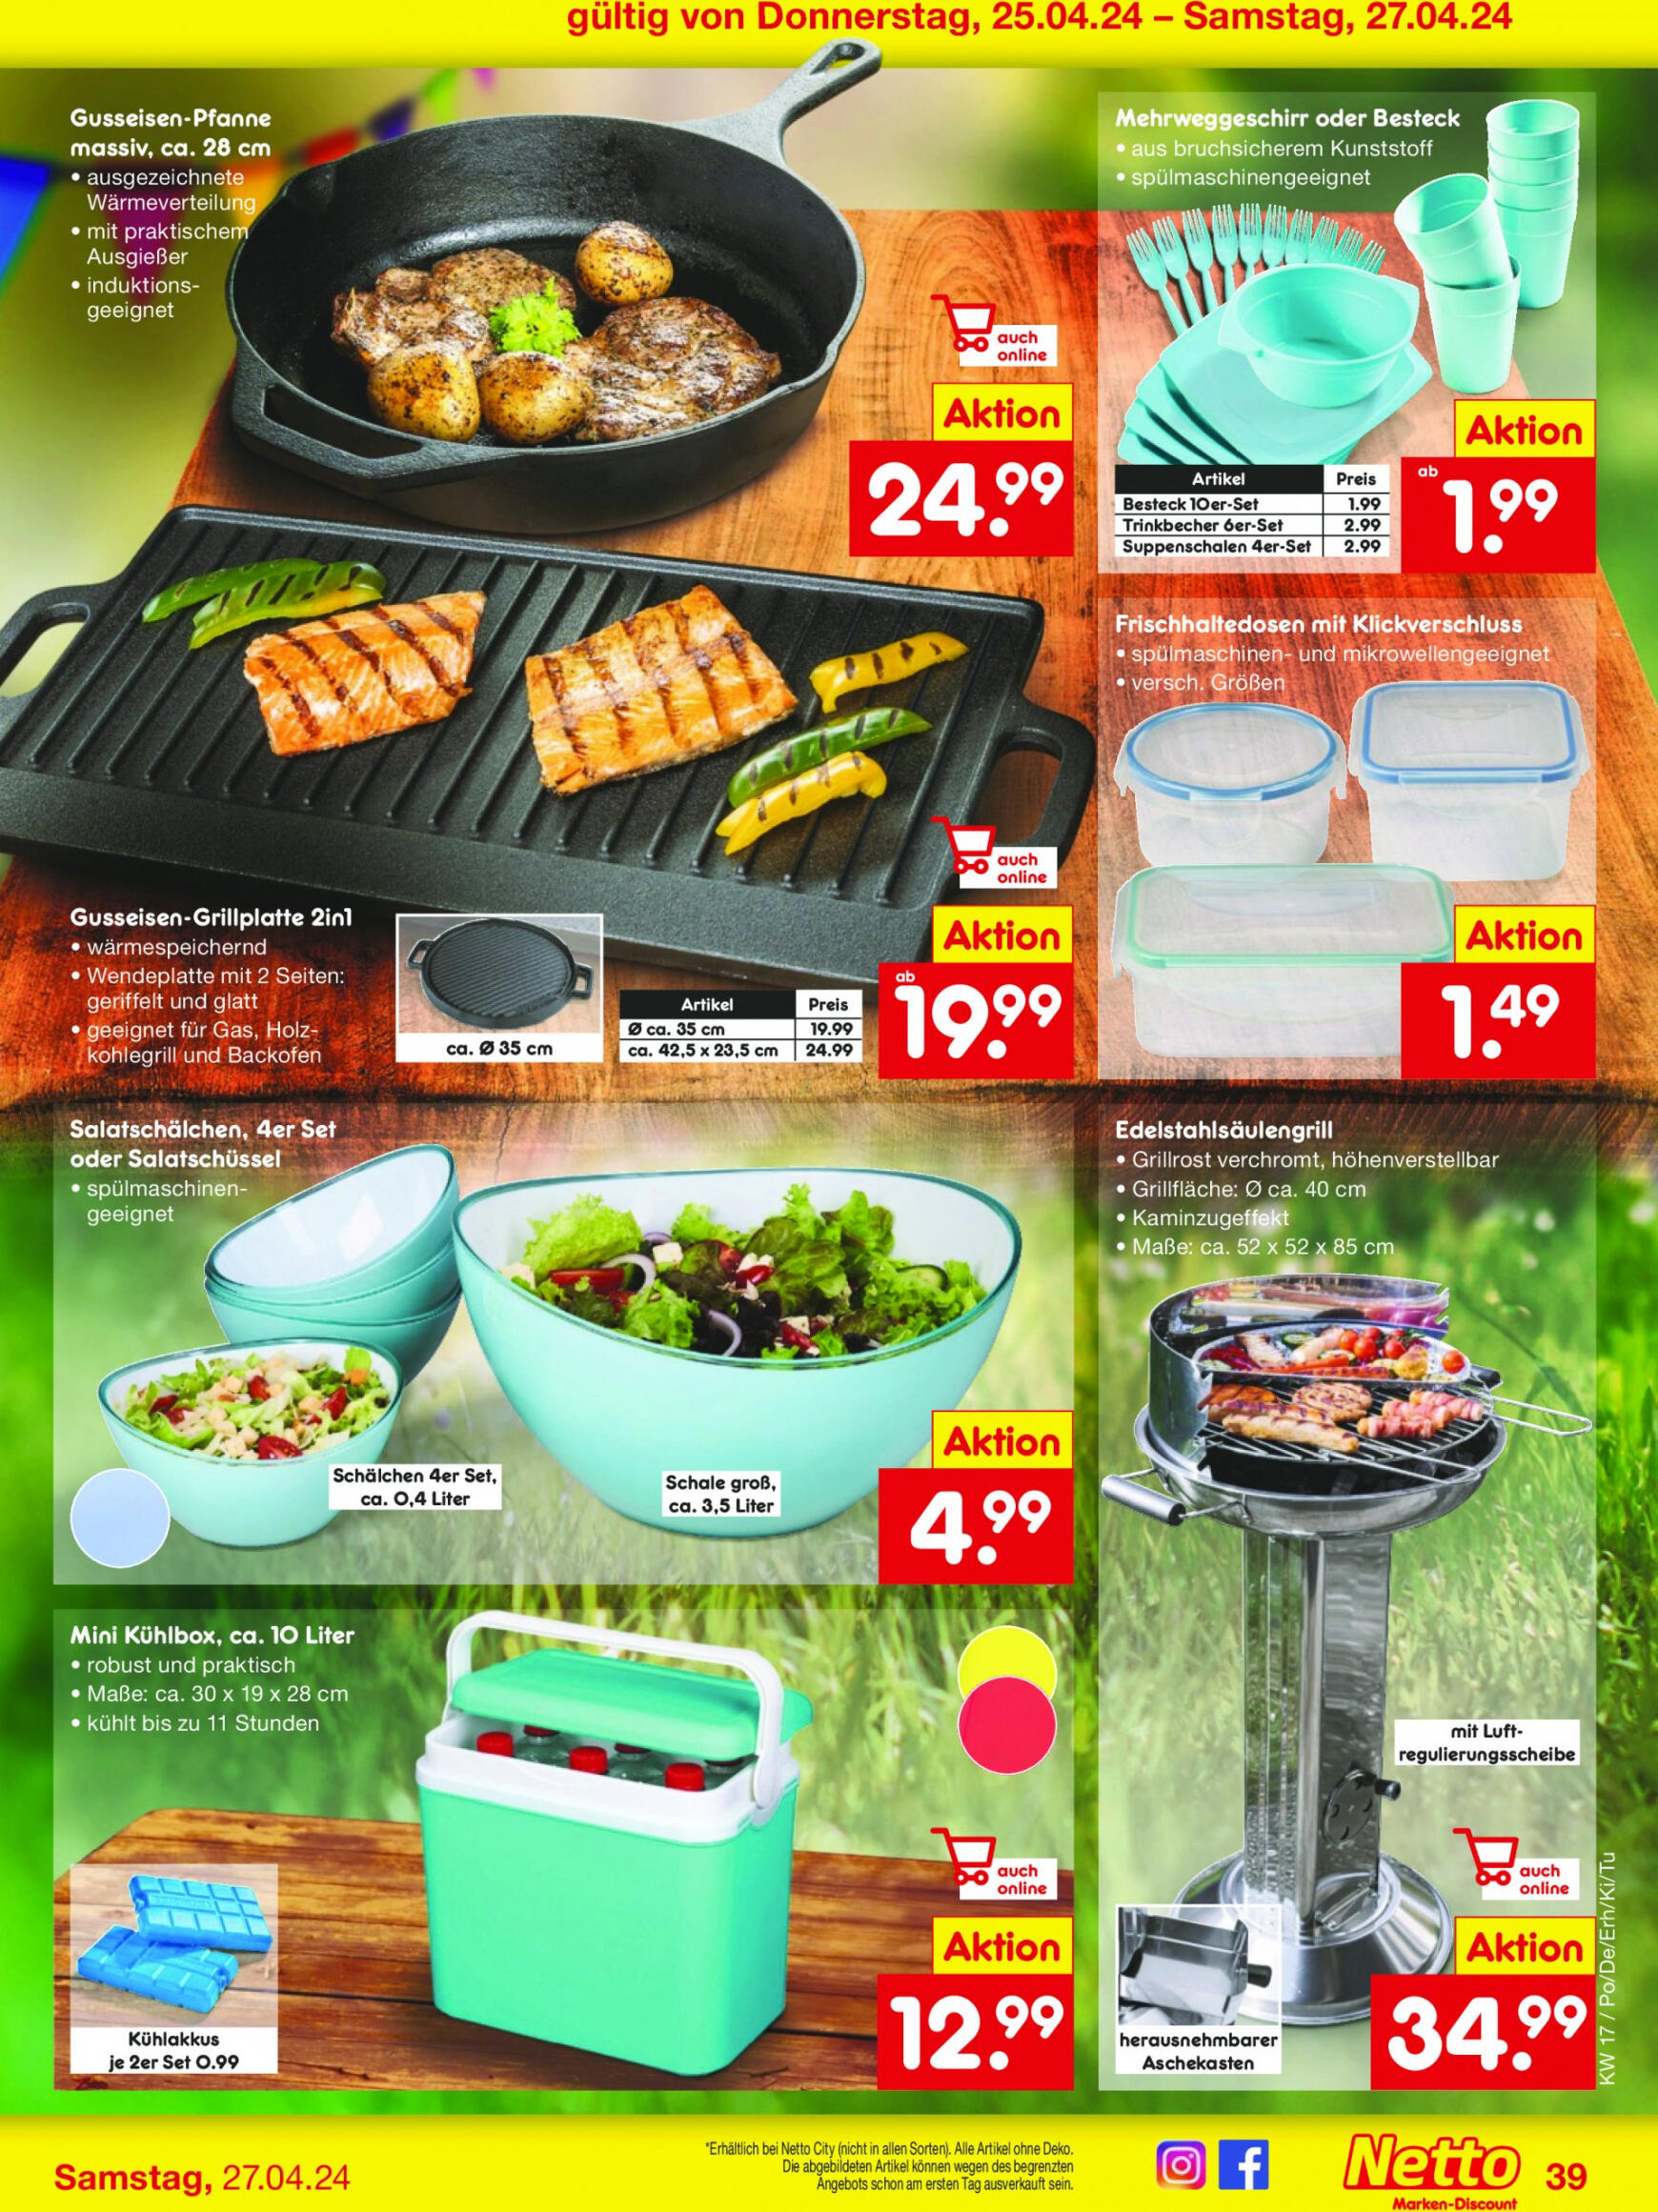 netto - Flyer Netto aktuell 22.04. - 27.04. - page: 45